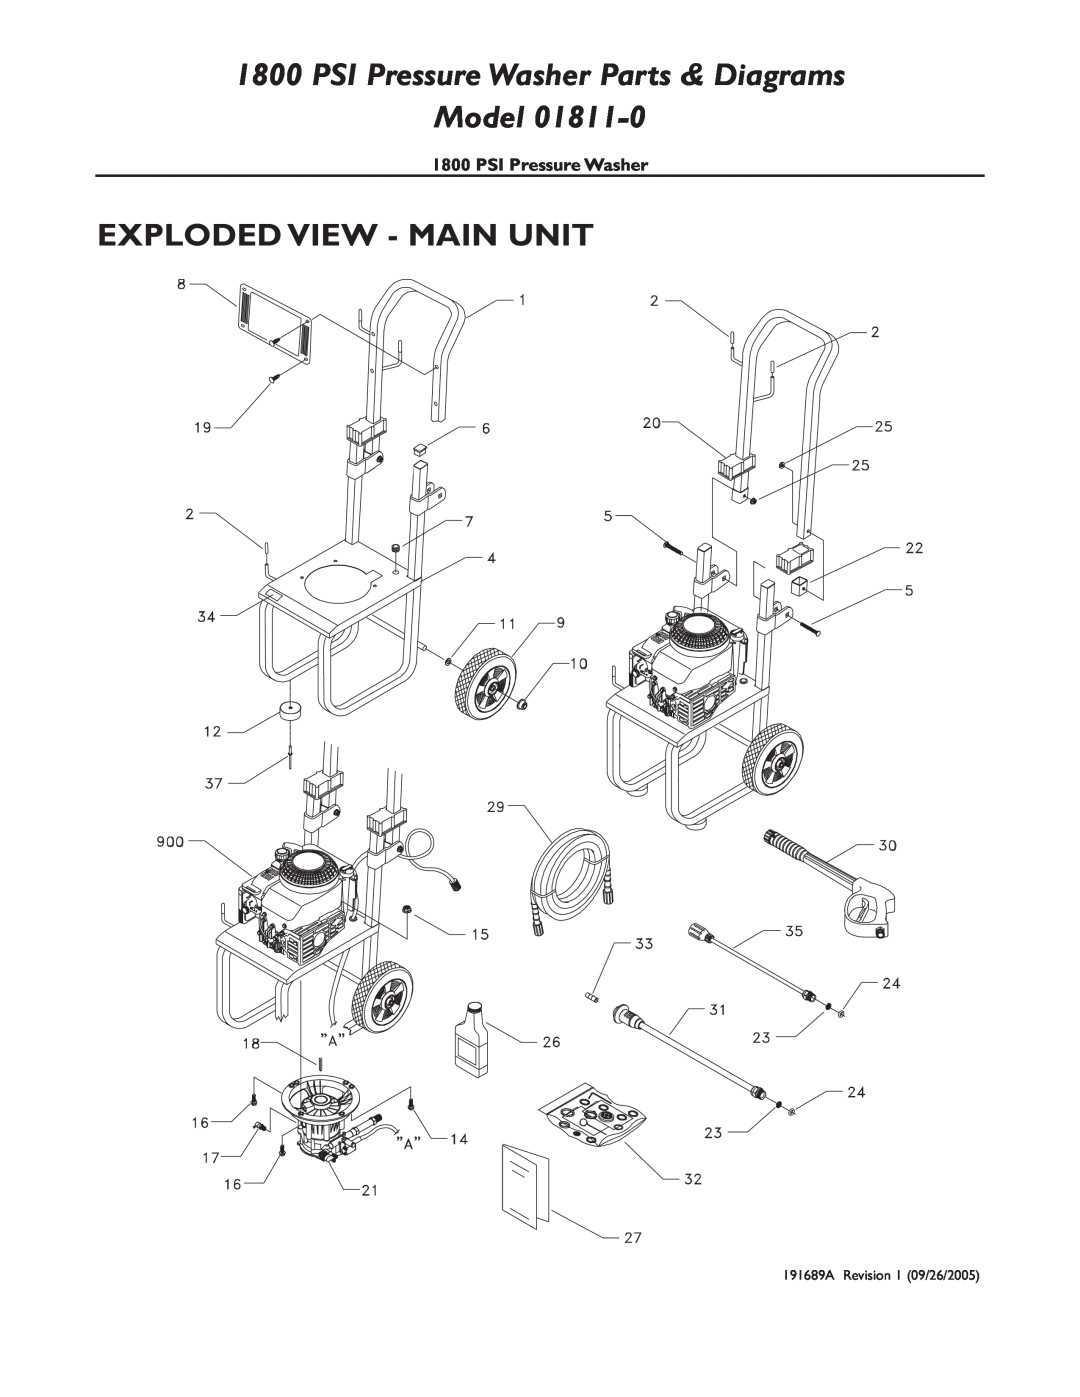 Briggs & Stratton 01811-0 manual Exploded View - Main Unit, PSI Pressure Washer, 191689A Revision 1 09/26/2005 